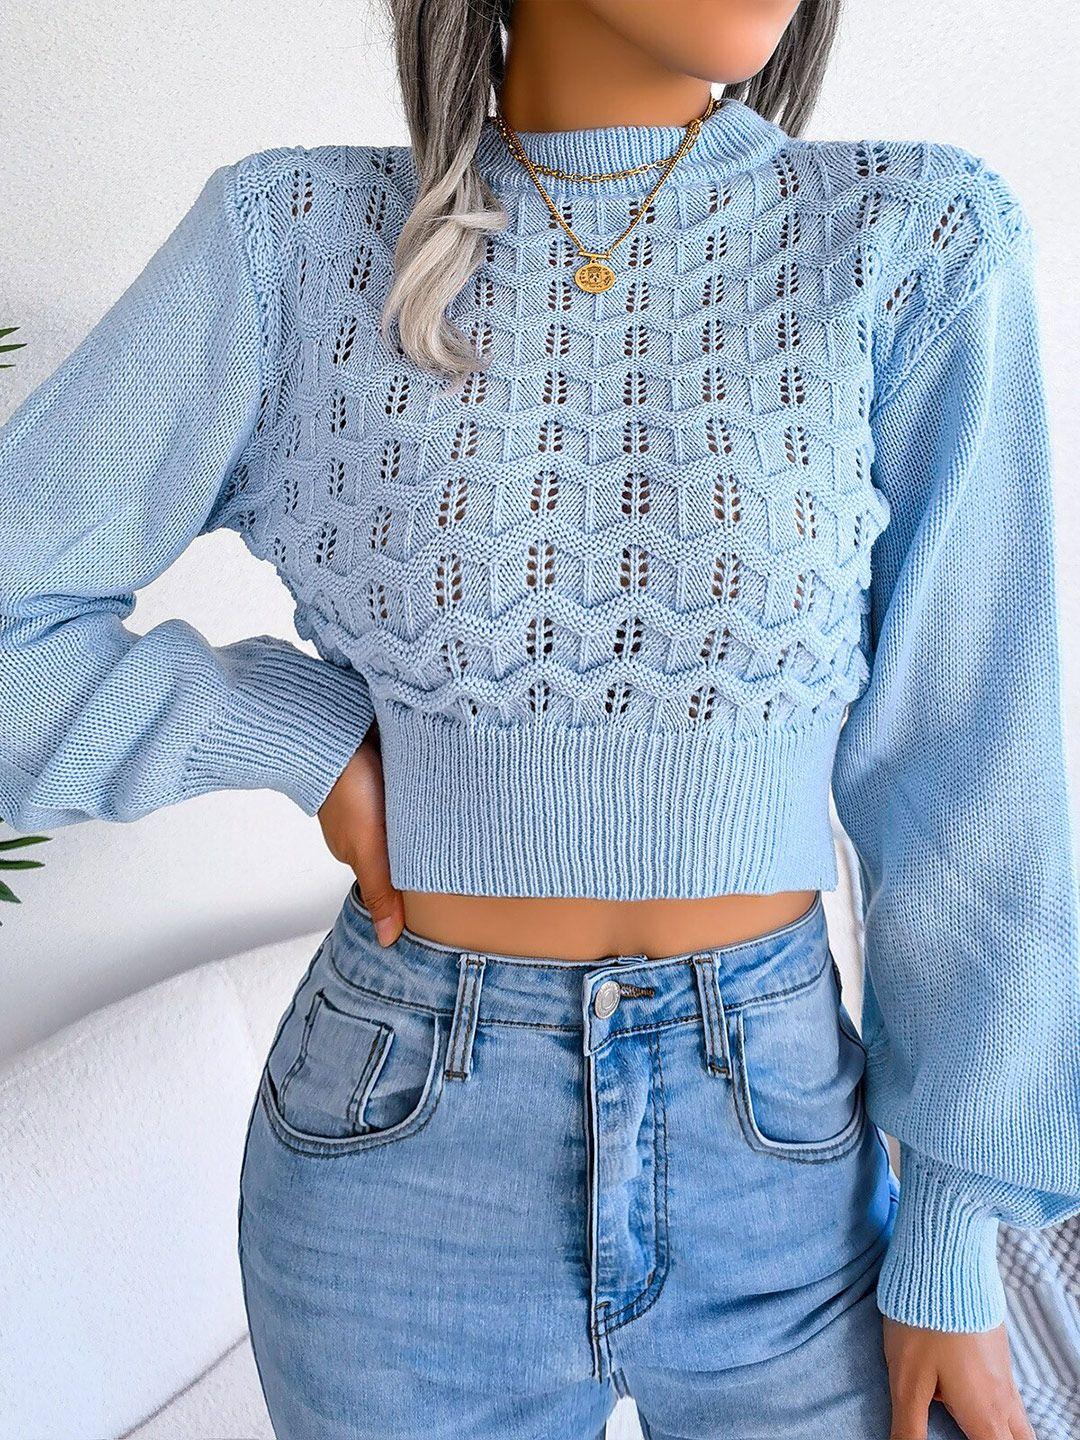 stylecast women blue cable knit crop pullover